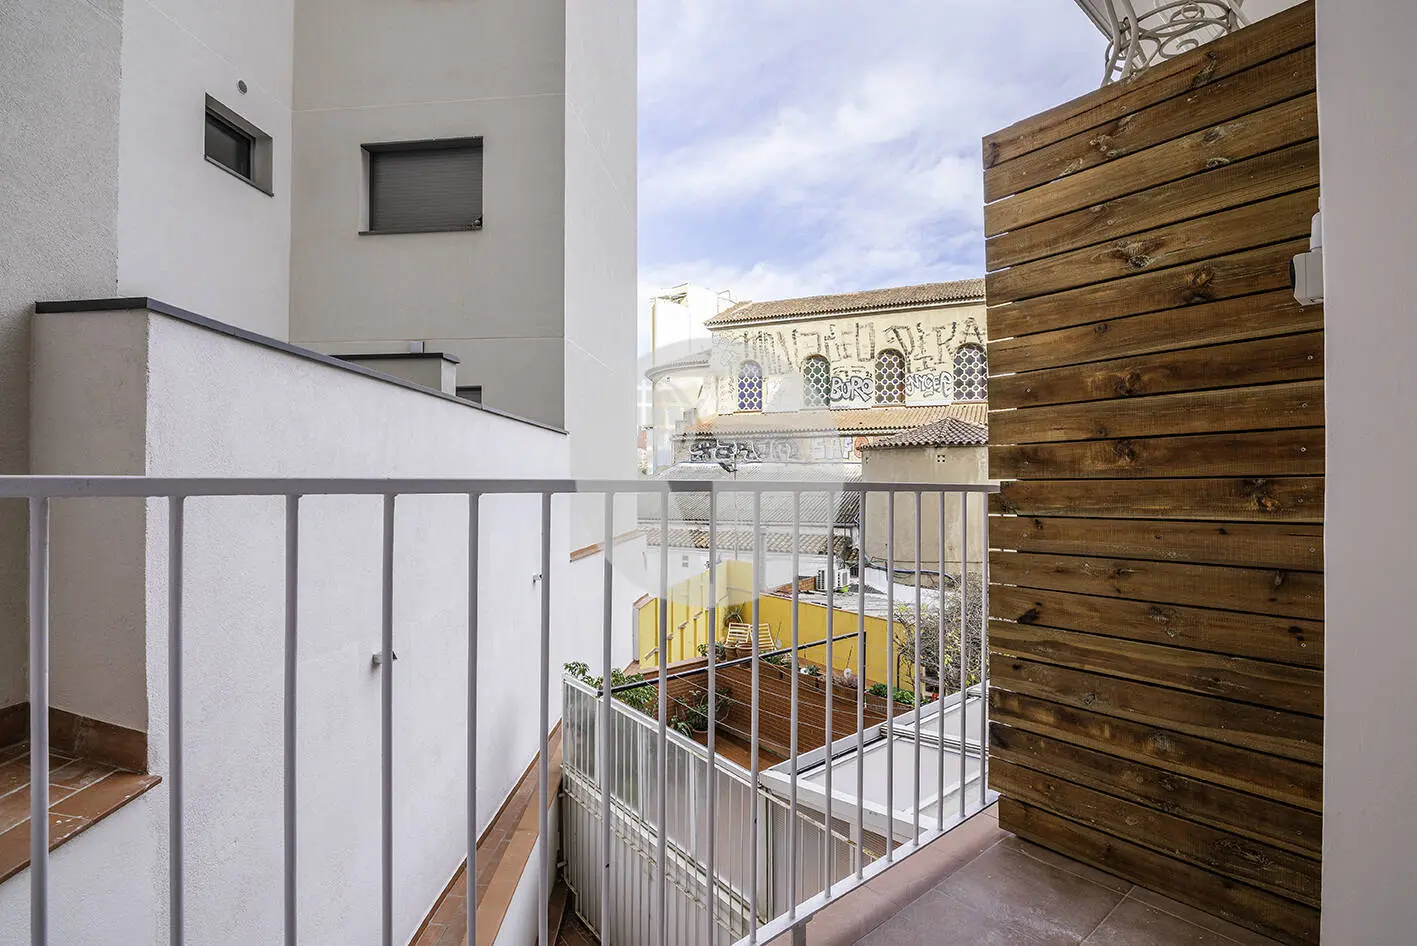 Brand new completely renovated apartment on Aragó street in the heart of El Clot in Barcelona. 35